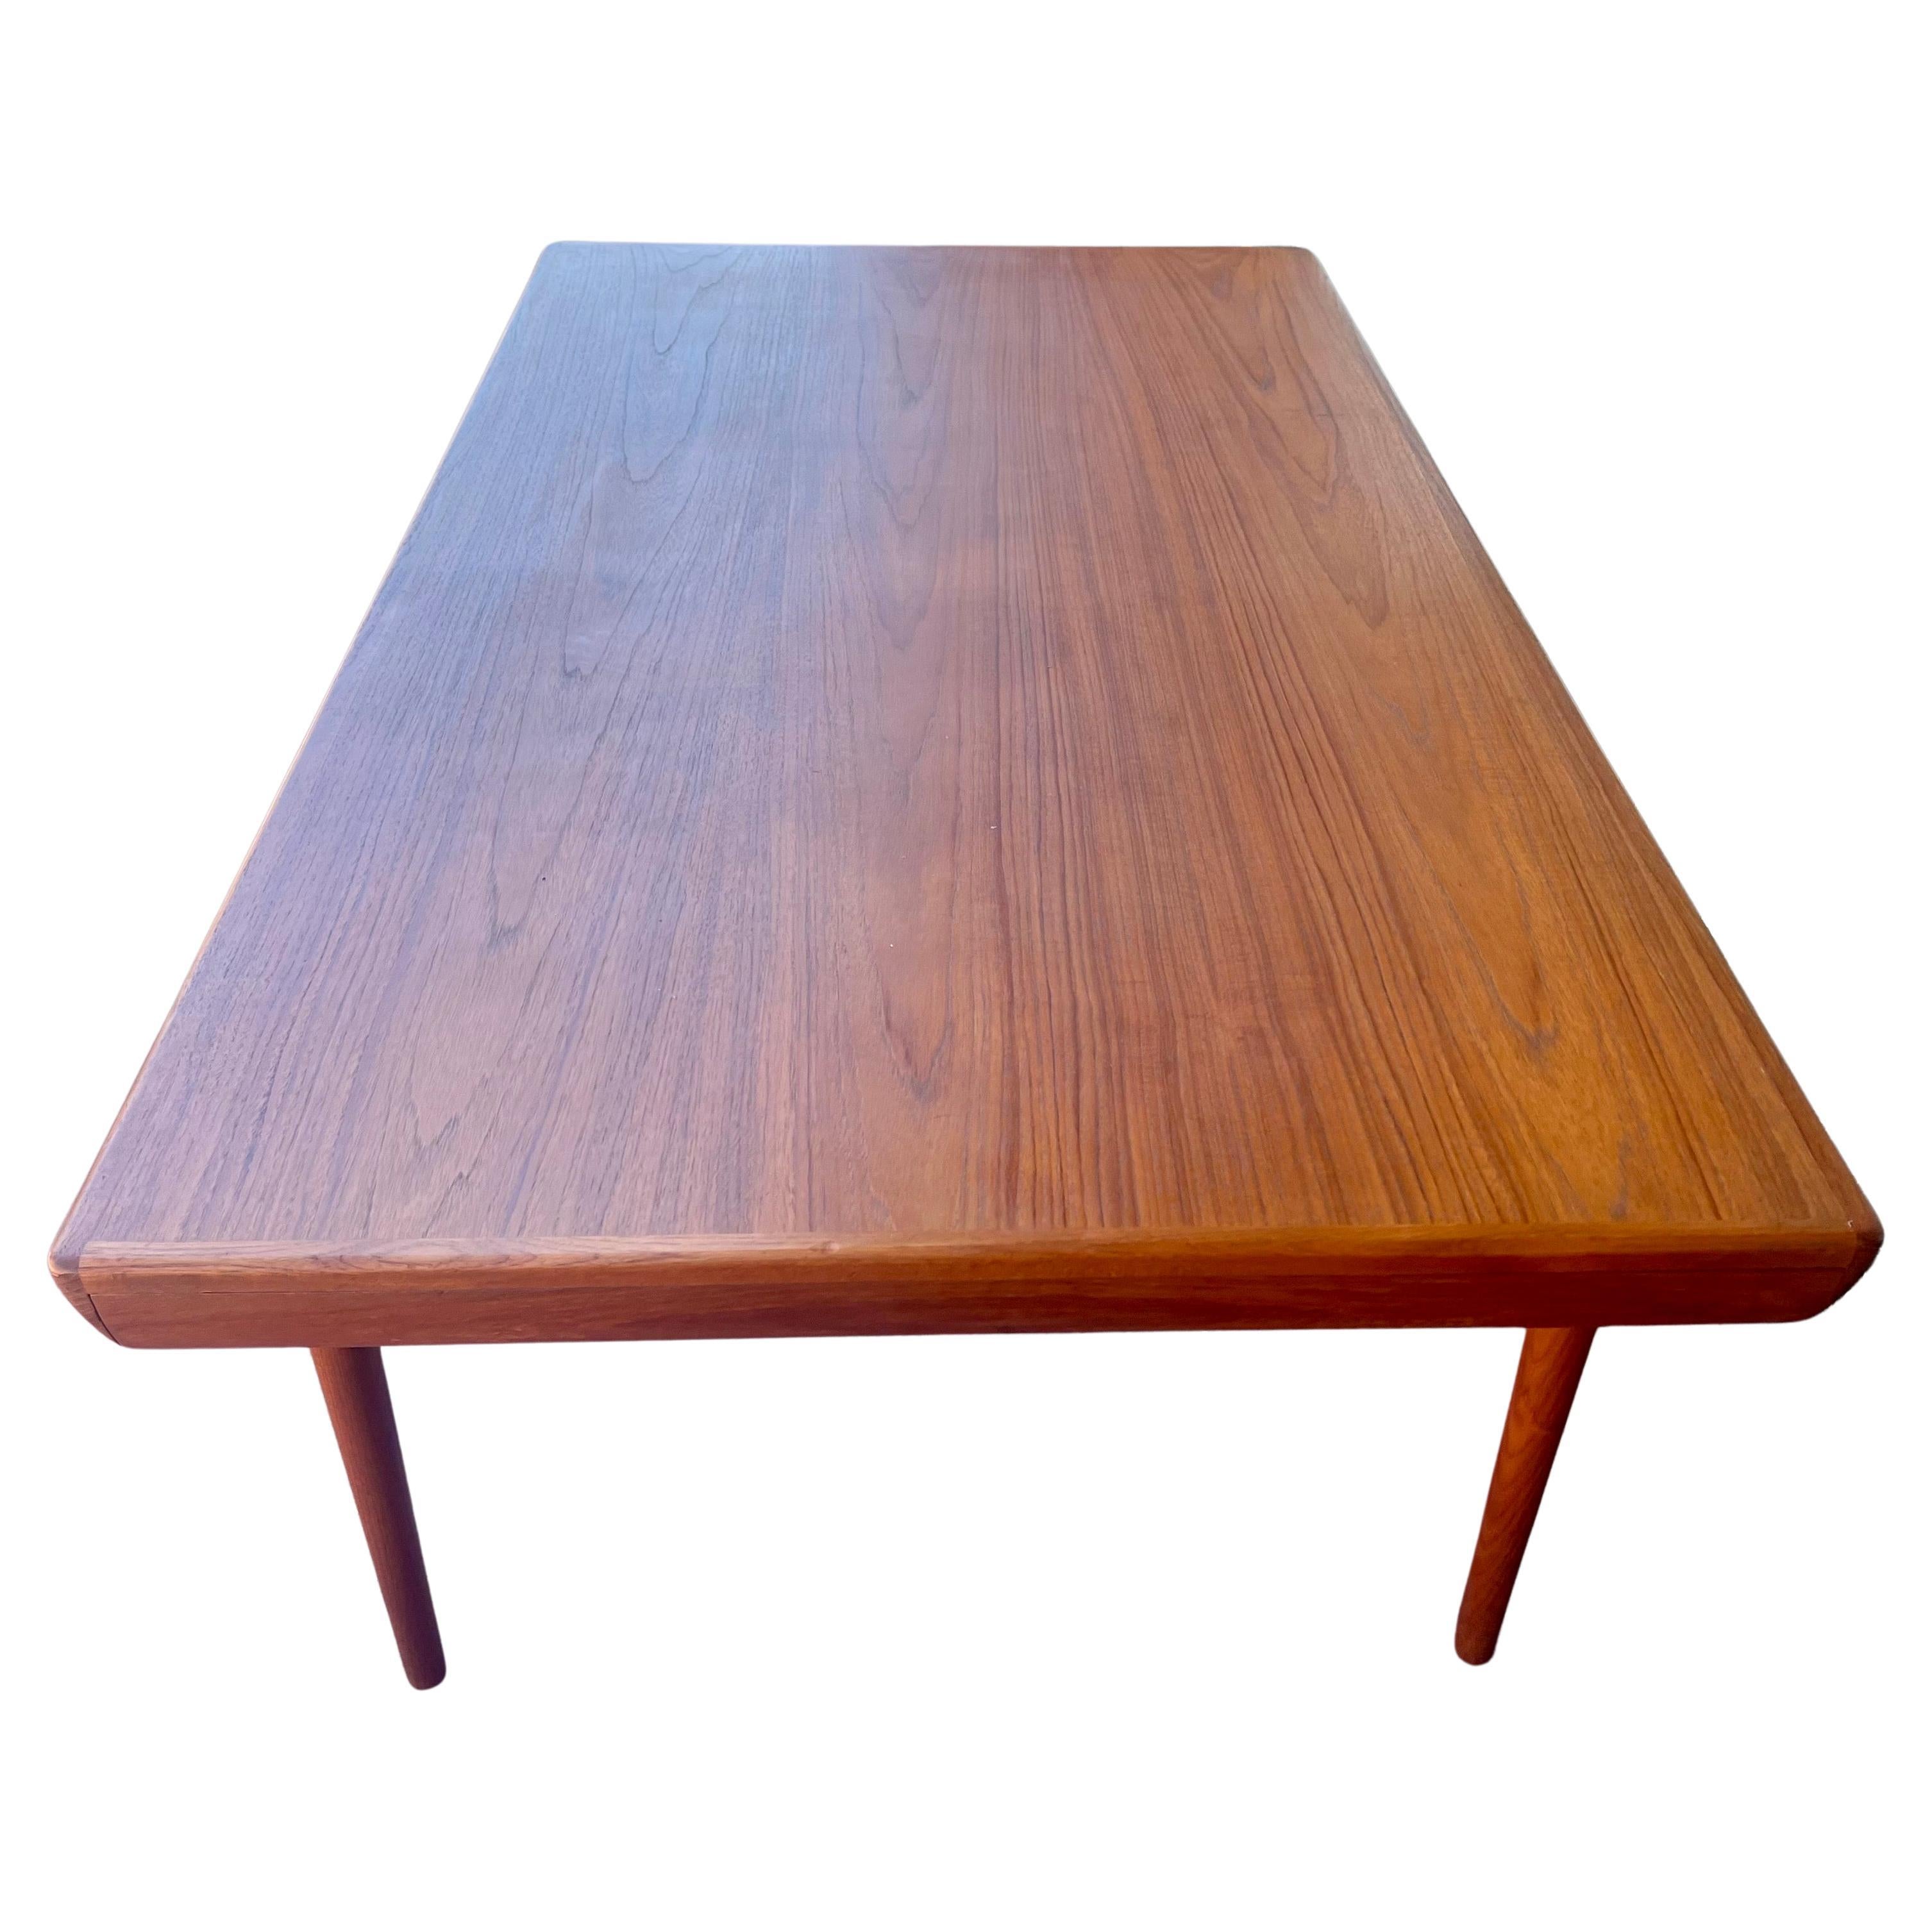 Scandinavian Modern Danish Modern Teak Dining Table With 2 Pull-out Leaves by Johannes Andersen For Sale